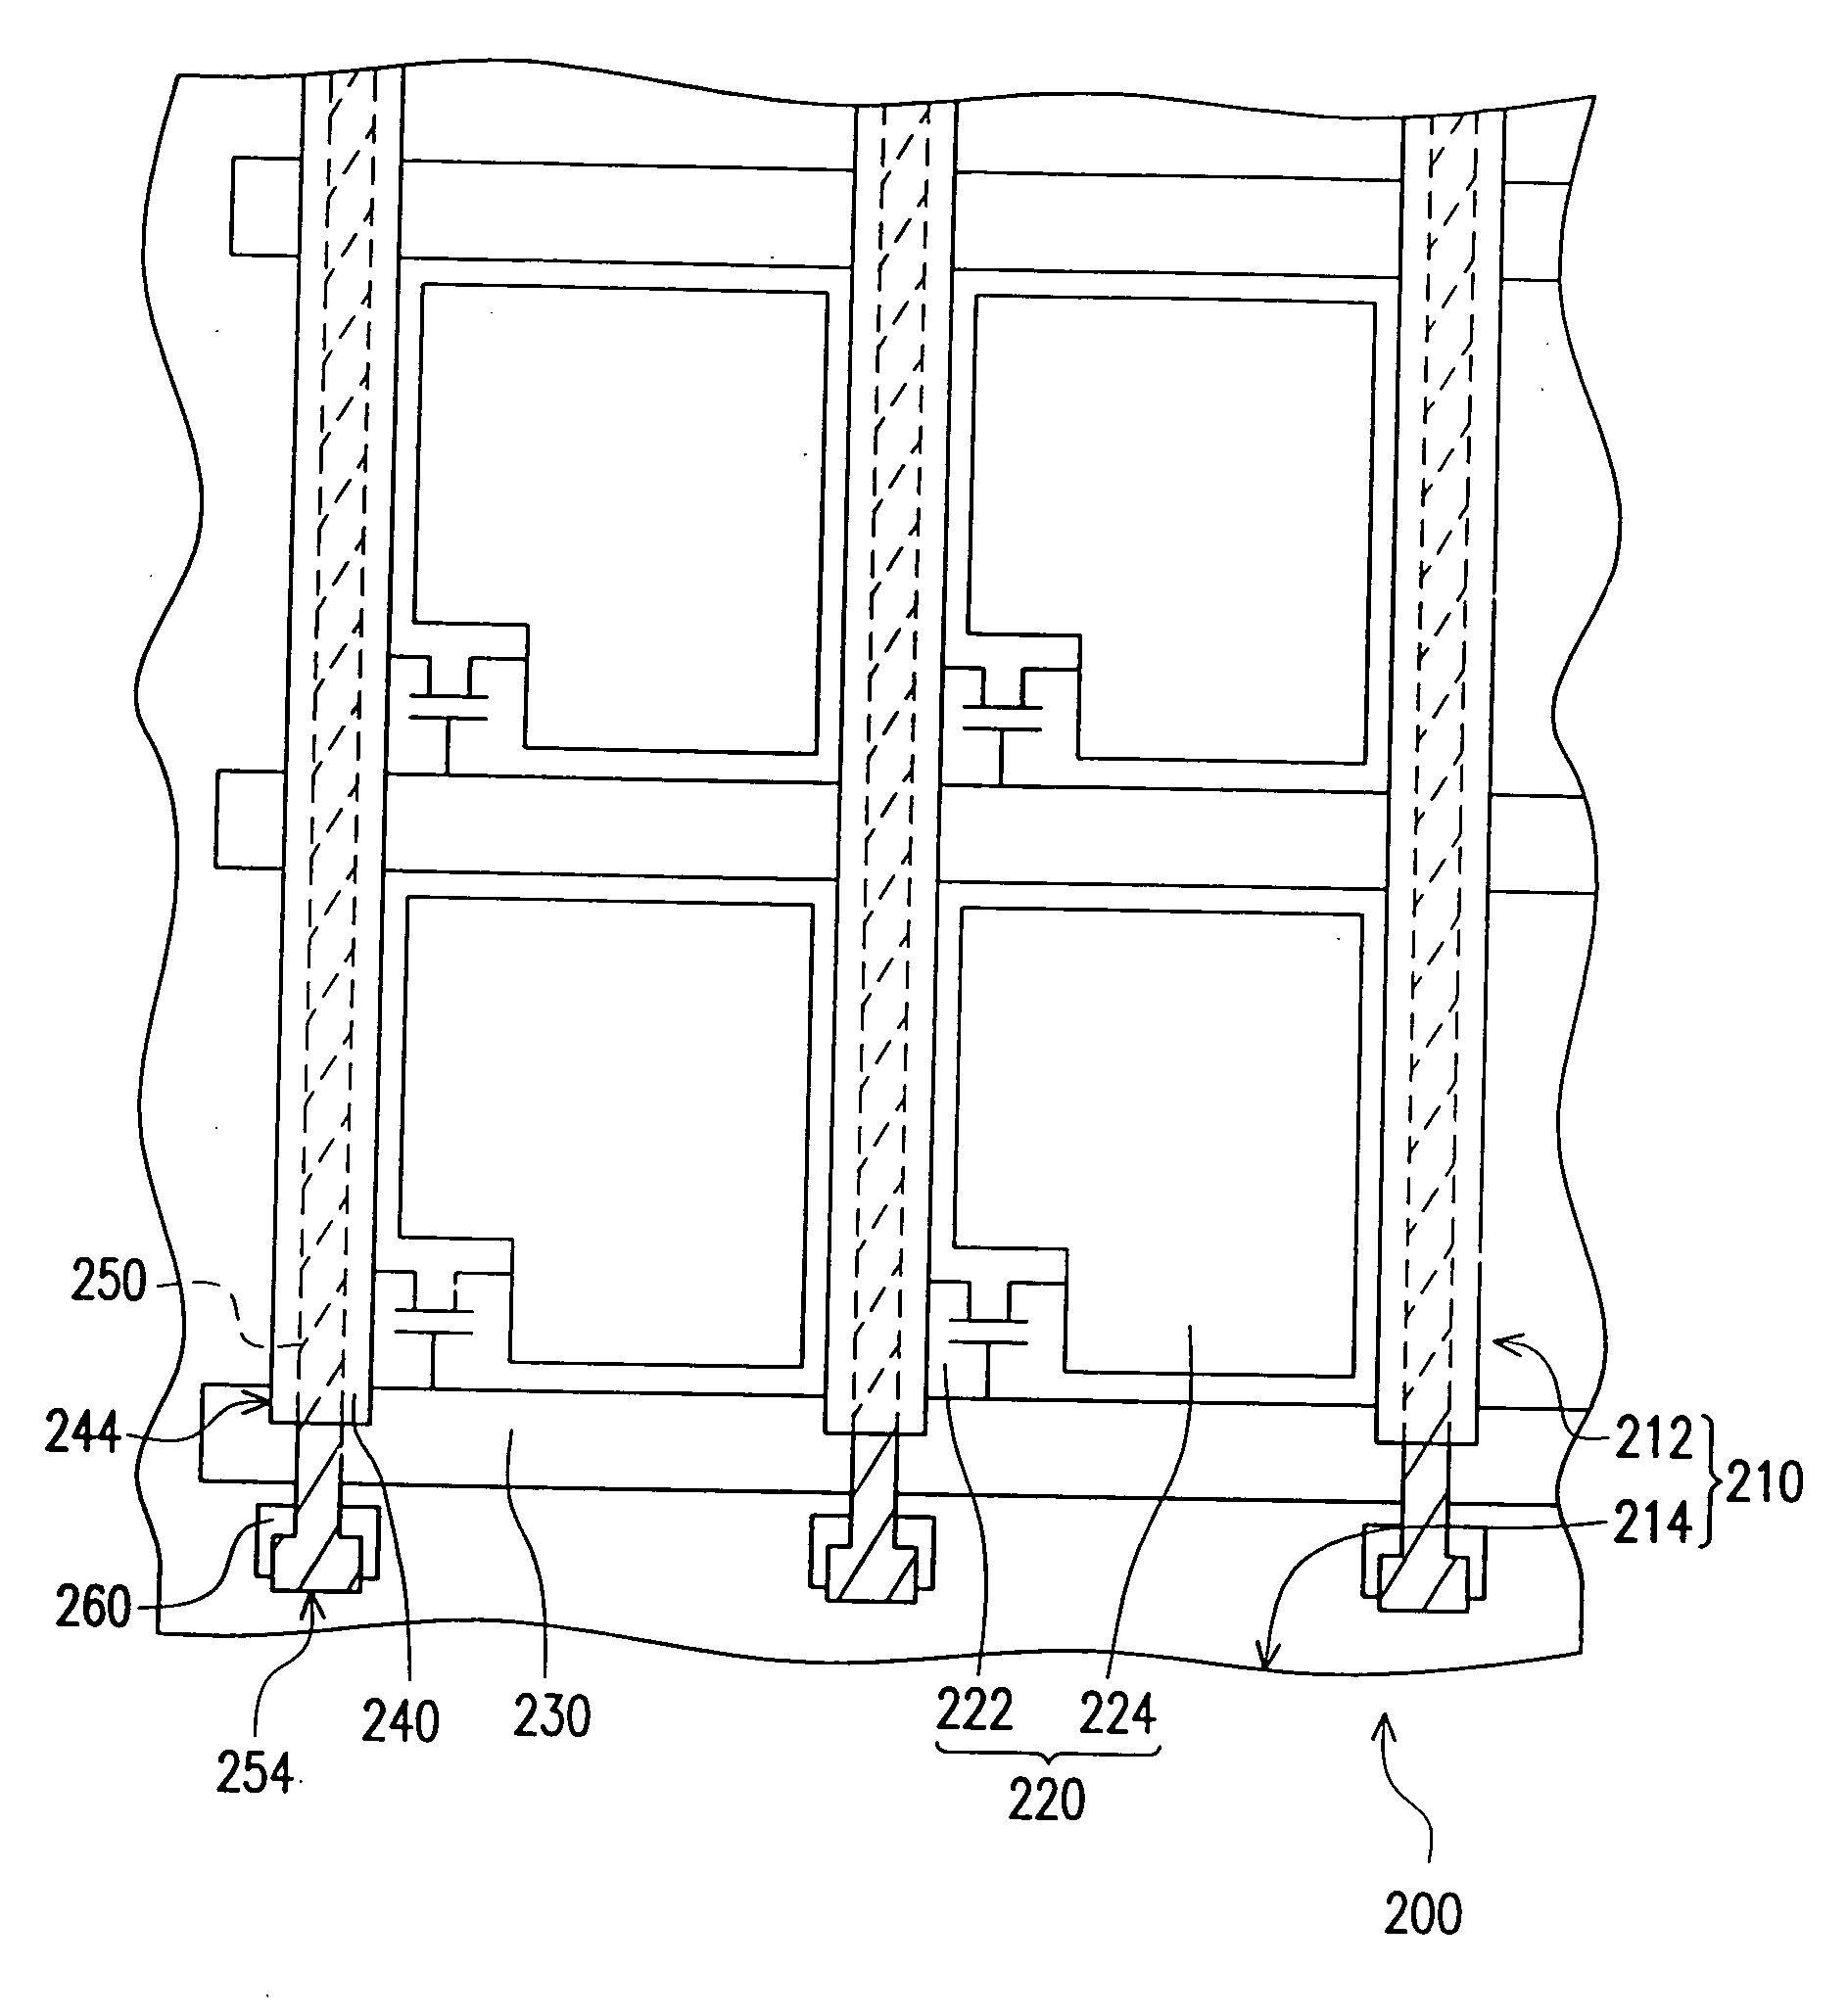 Thin film transistor array substrate for reducing electrostatic discharge damage